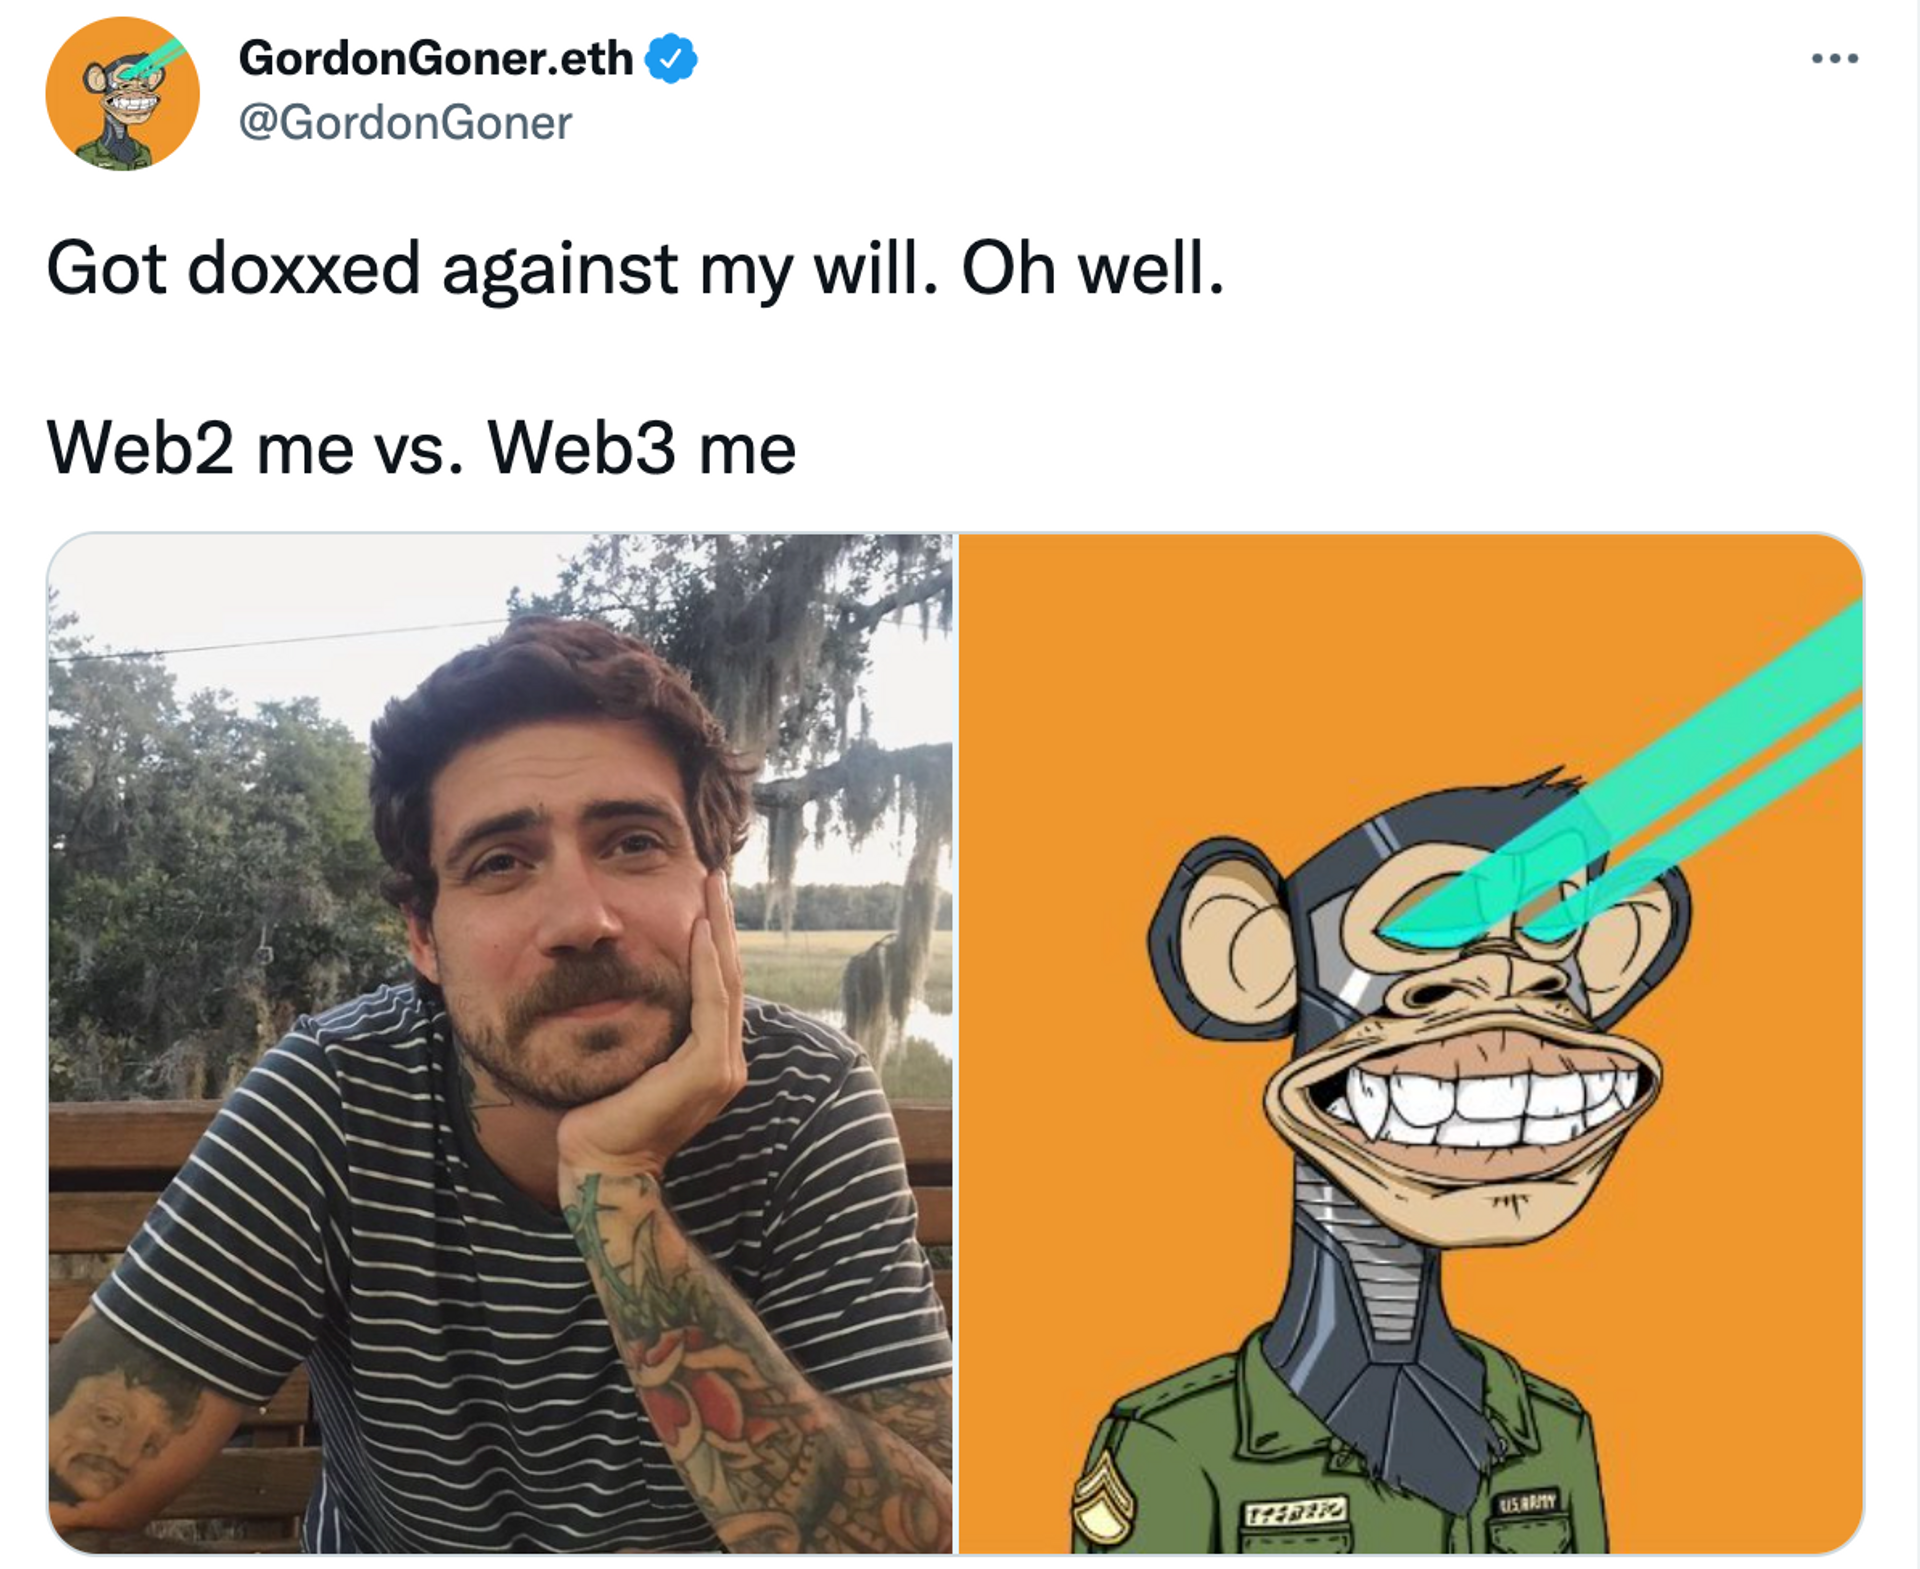 Greg Solano, known online under the pseudonym Gordon Goner, claims he was "doxxed" by Buzzfeed News after it revealed him as one of the founders of Bored Ape Yacht Club